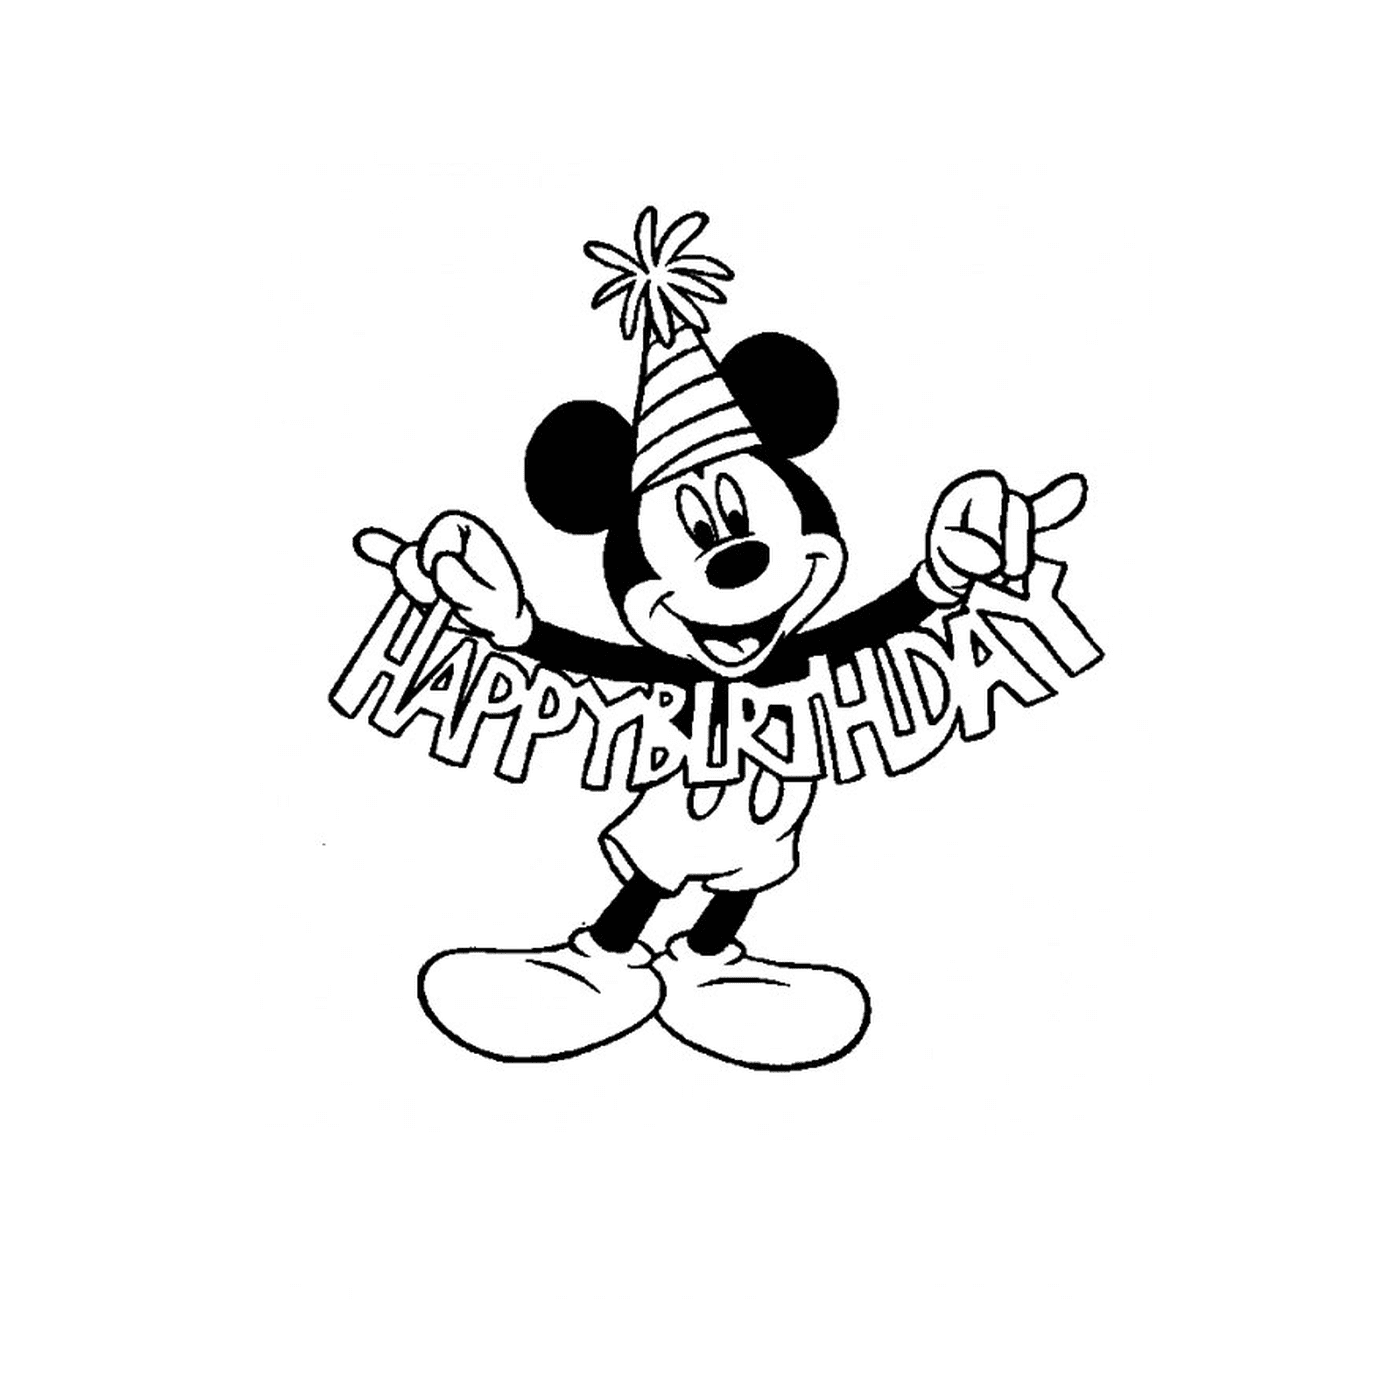  Mickey Mouse holding a Happy Birthday sign 